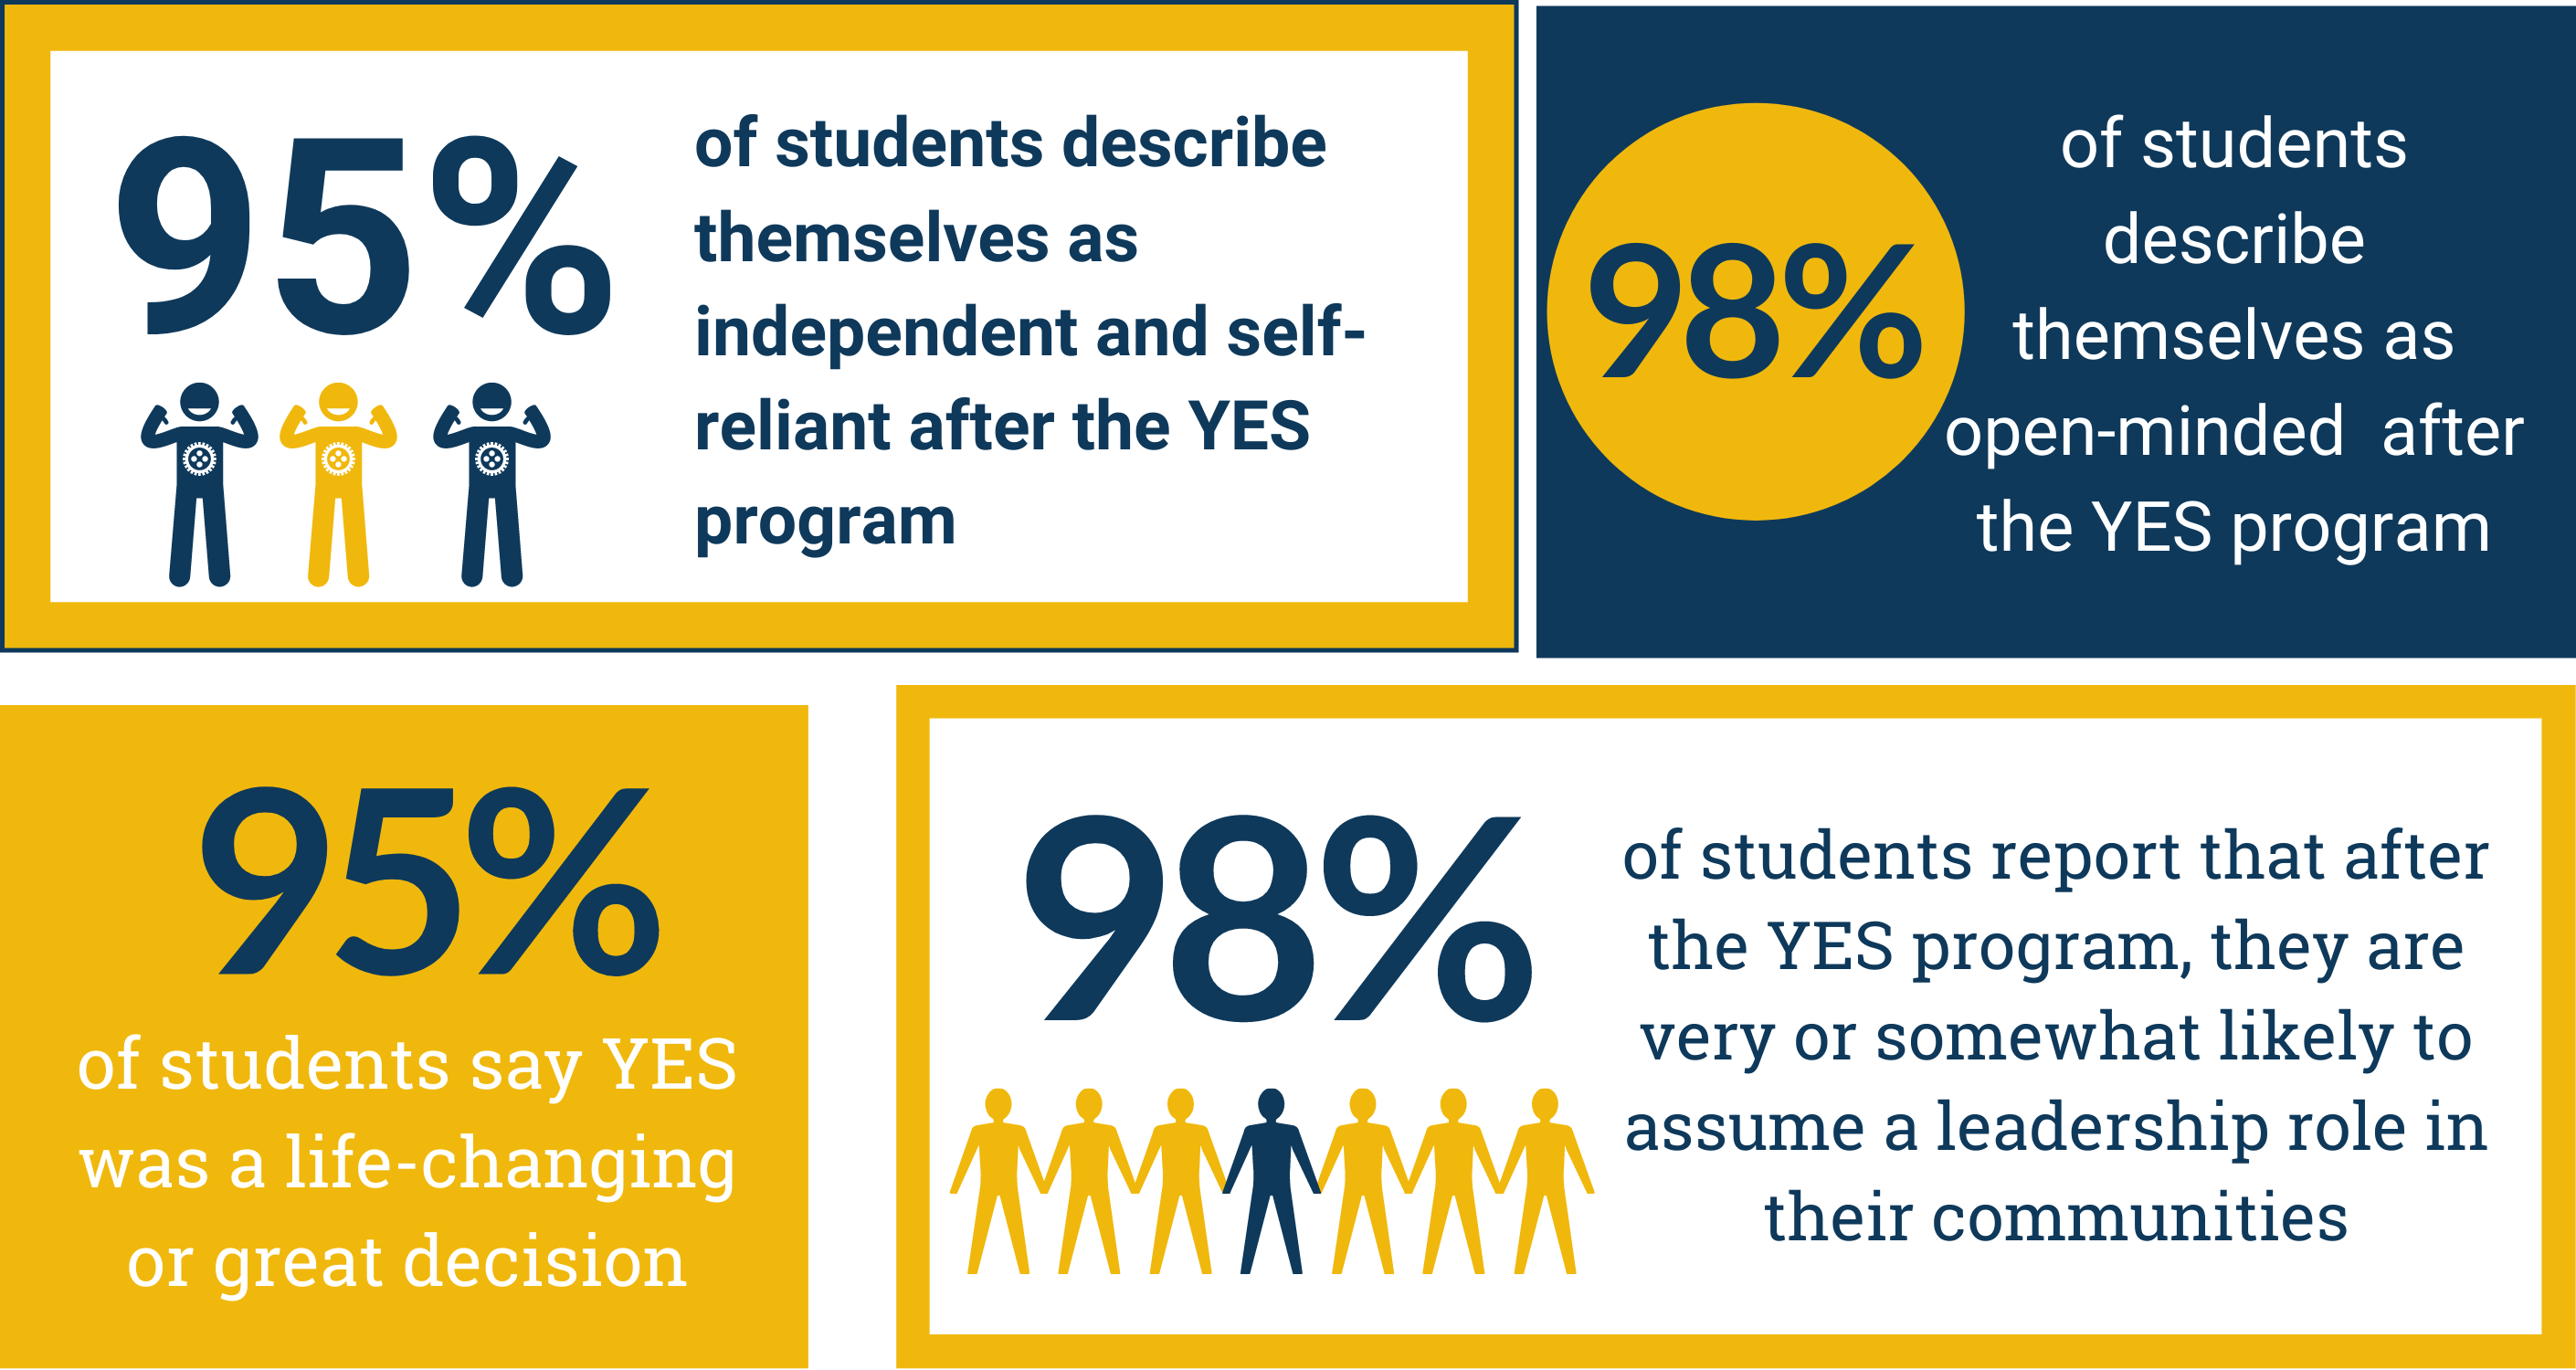 95% of students describe themselves as independent after YES, 98% of students describe themselves as open minded